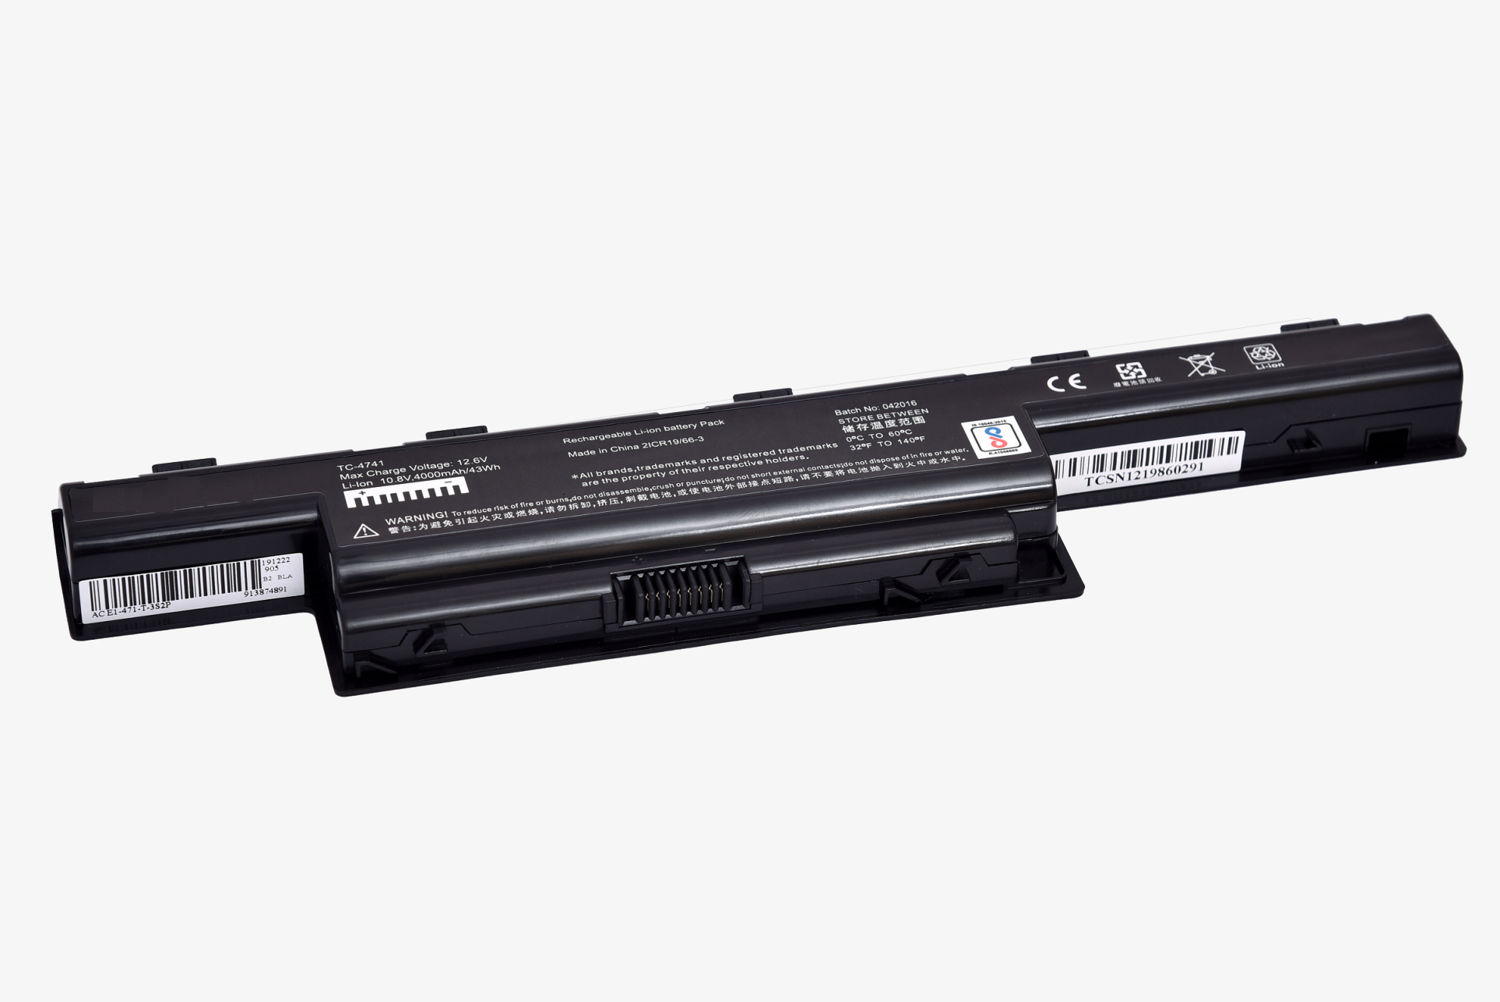 Acer Travelmate 4740, 5740, 5742, 7740, 8572 Laptop Battery